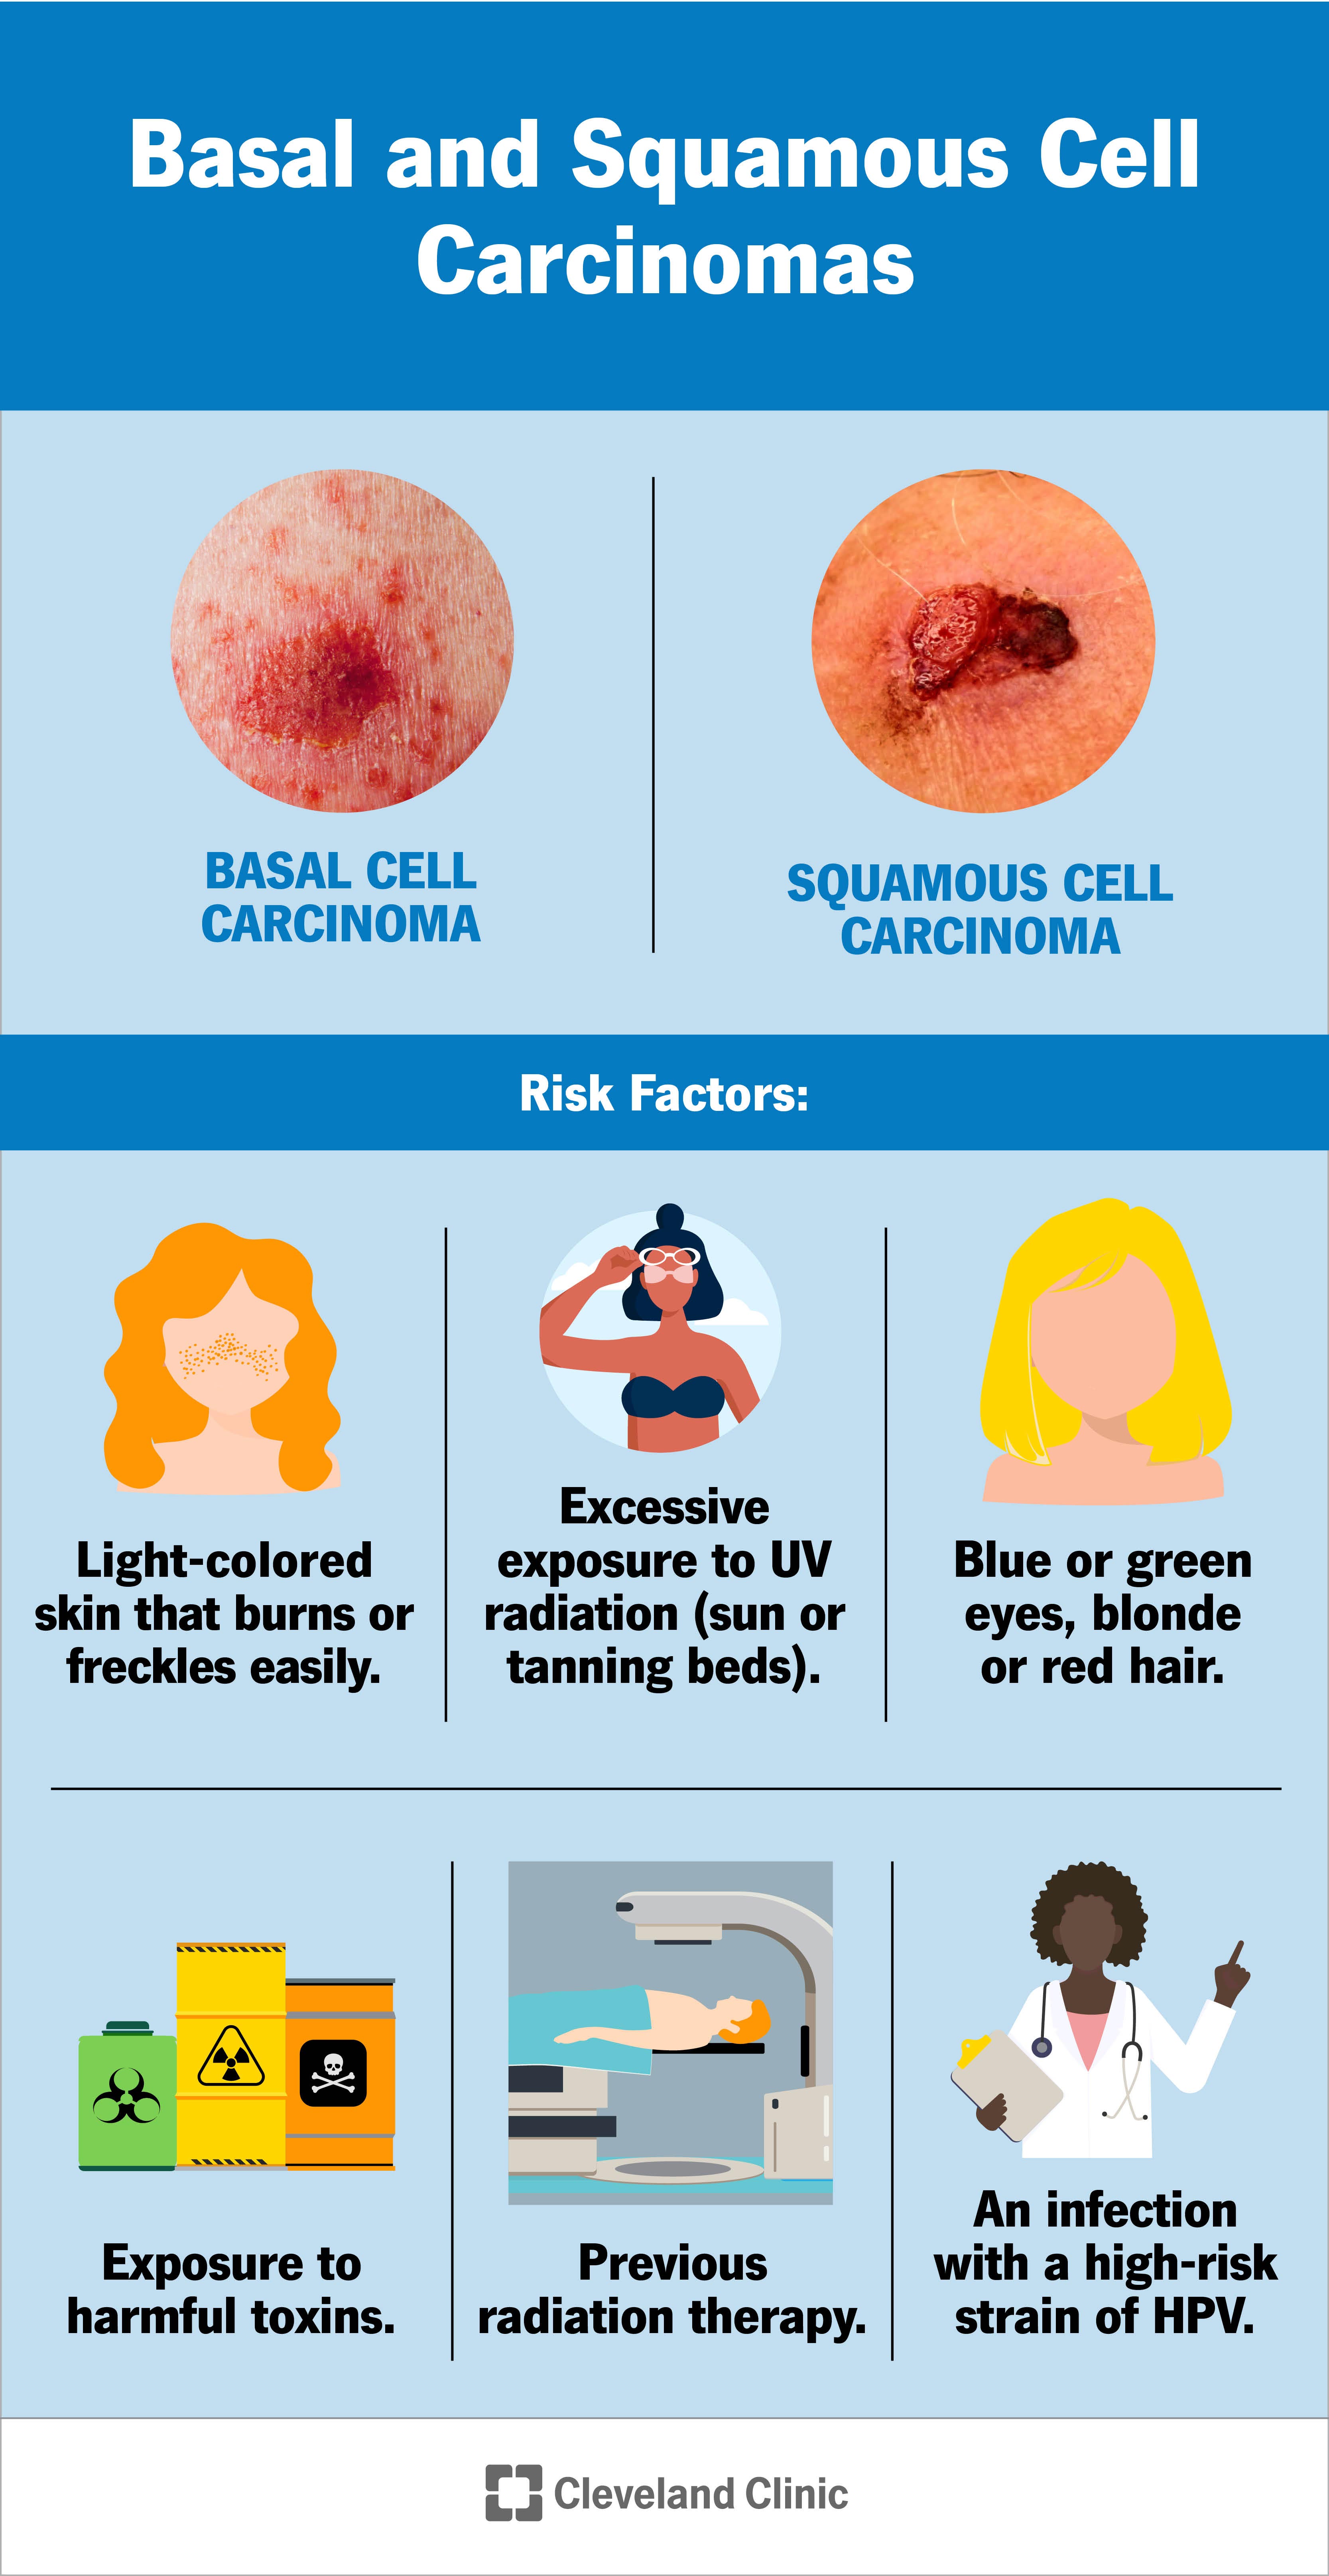 Risk factors for basal and squamous cell carcinoma include excessive exposure to UV radiation, light-colored skin that burns or freckles easily, blue or green eyes, blonde or red hair, an infection with a high-risk strain of HPV, previous radiation therapy and exposure to harmful toxins.